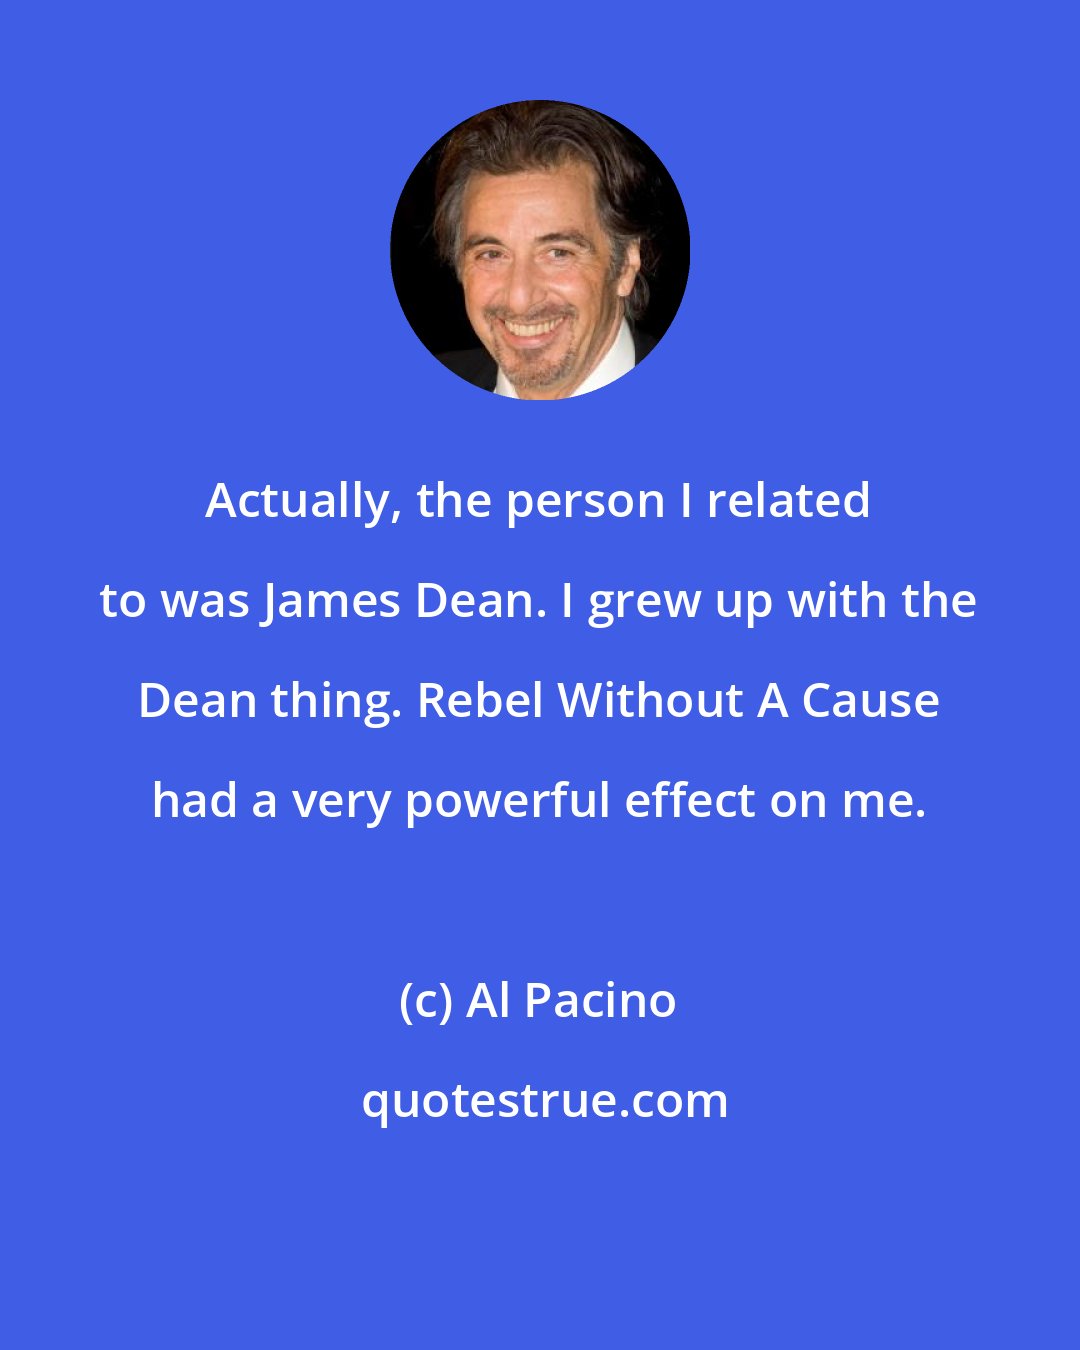 Al Pacino: Actually, the person I related to was James Dean. I grew up with the Dean thing. Rebel Without A Cause had a very powerful effect on me.